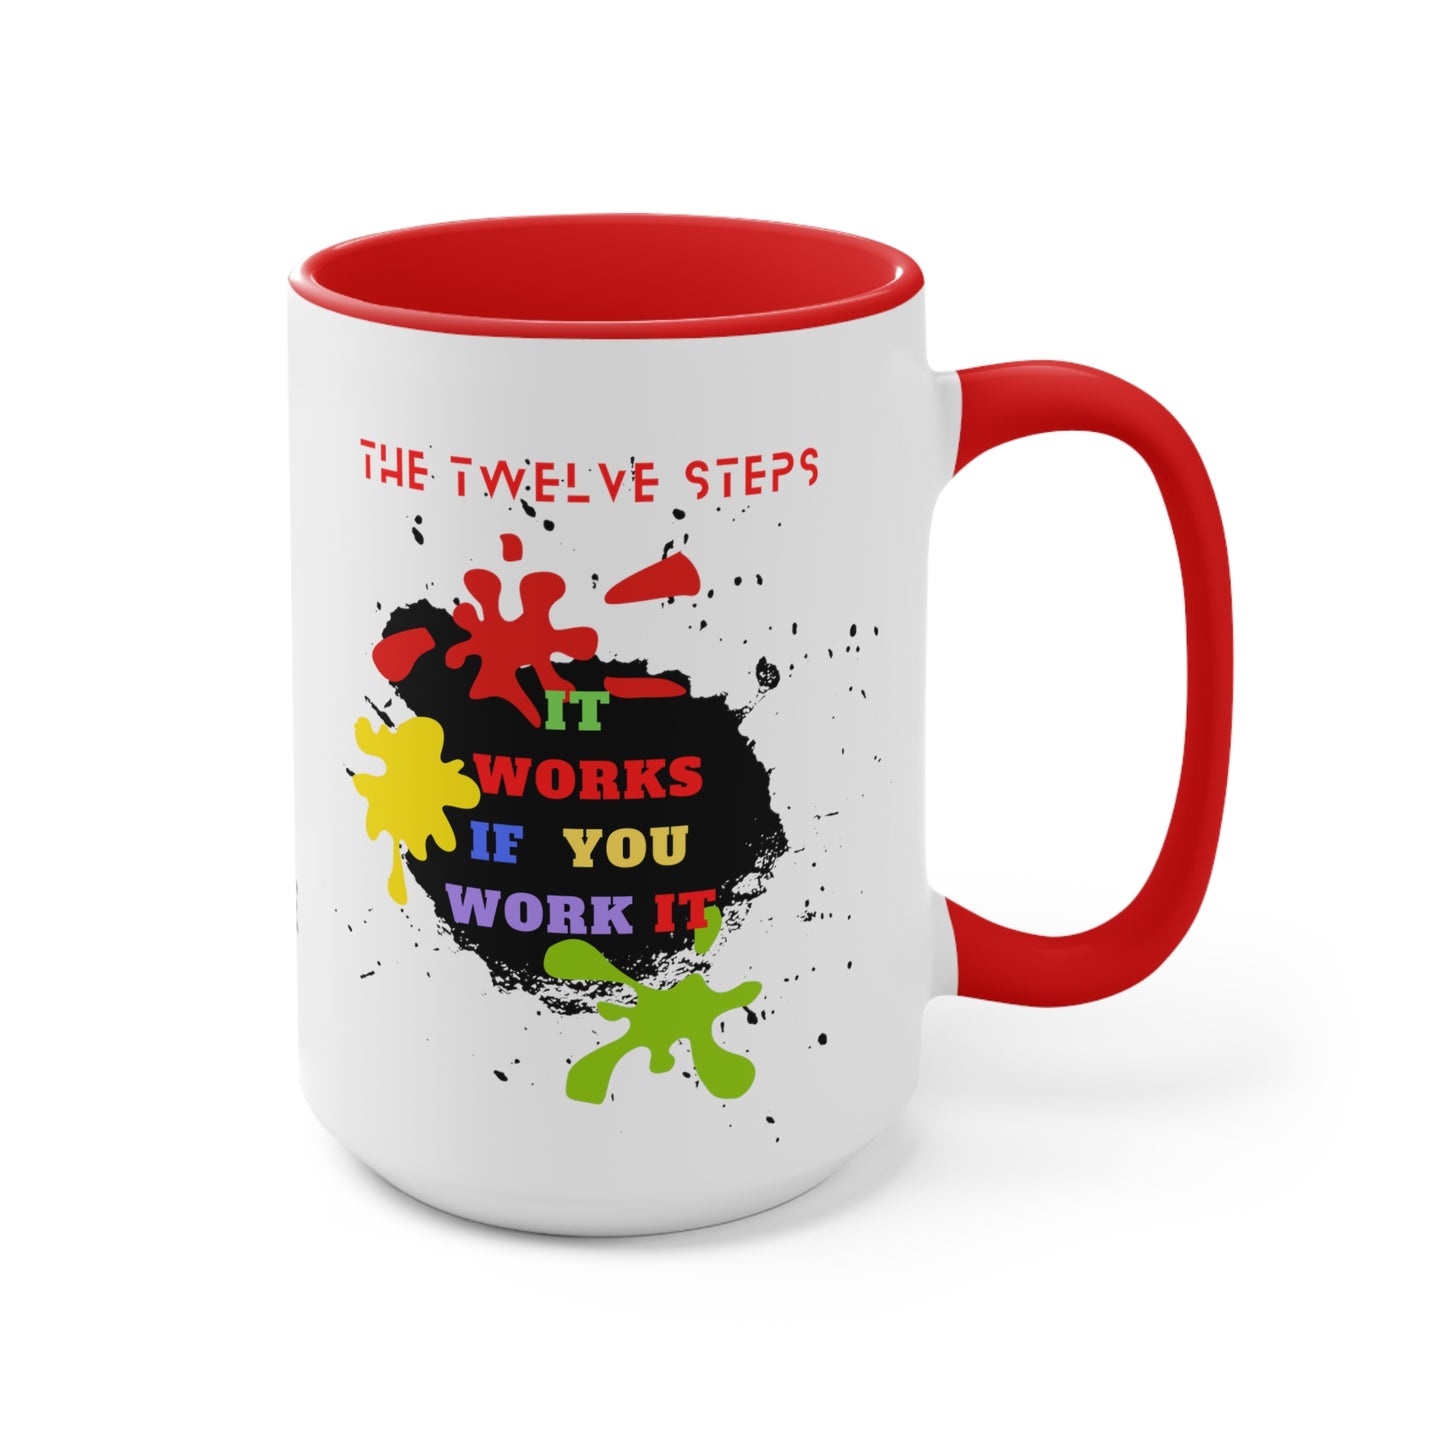 "It Works If You Work It" Ex-Large Recovery Mug